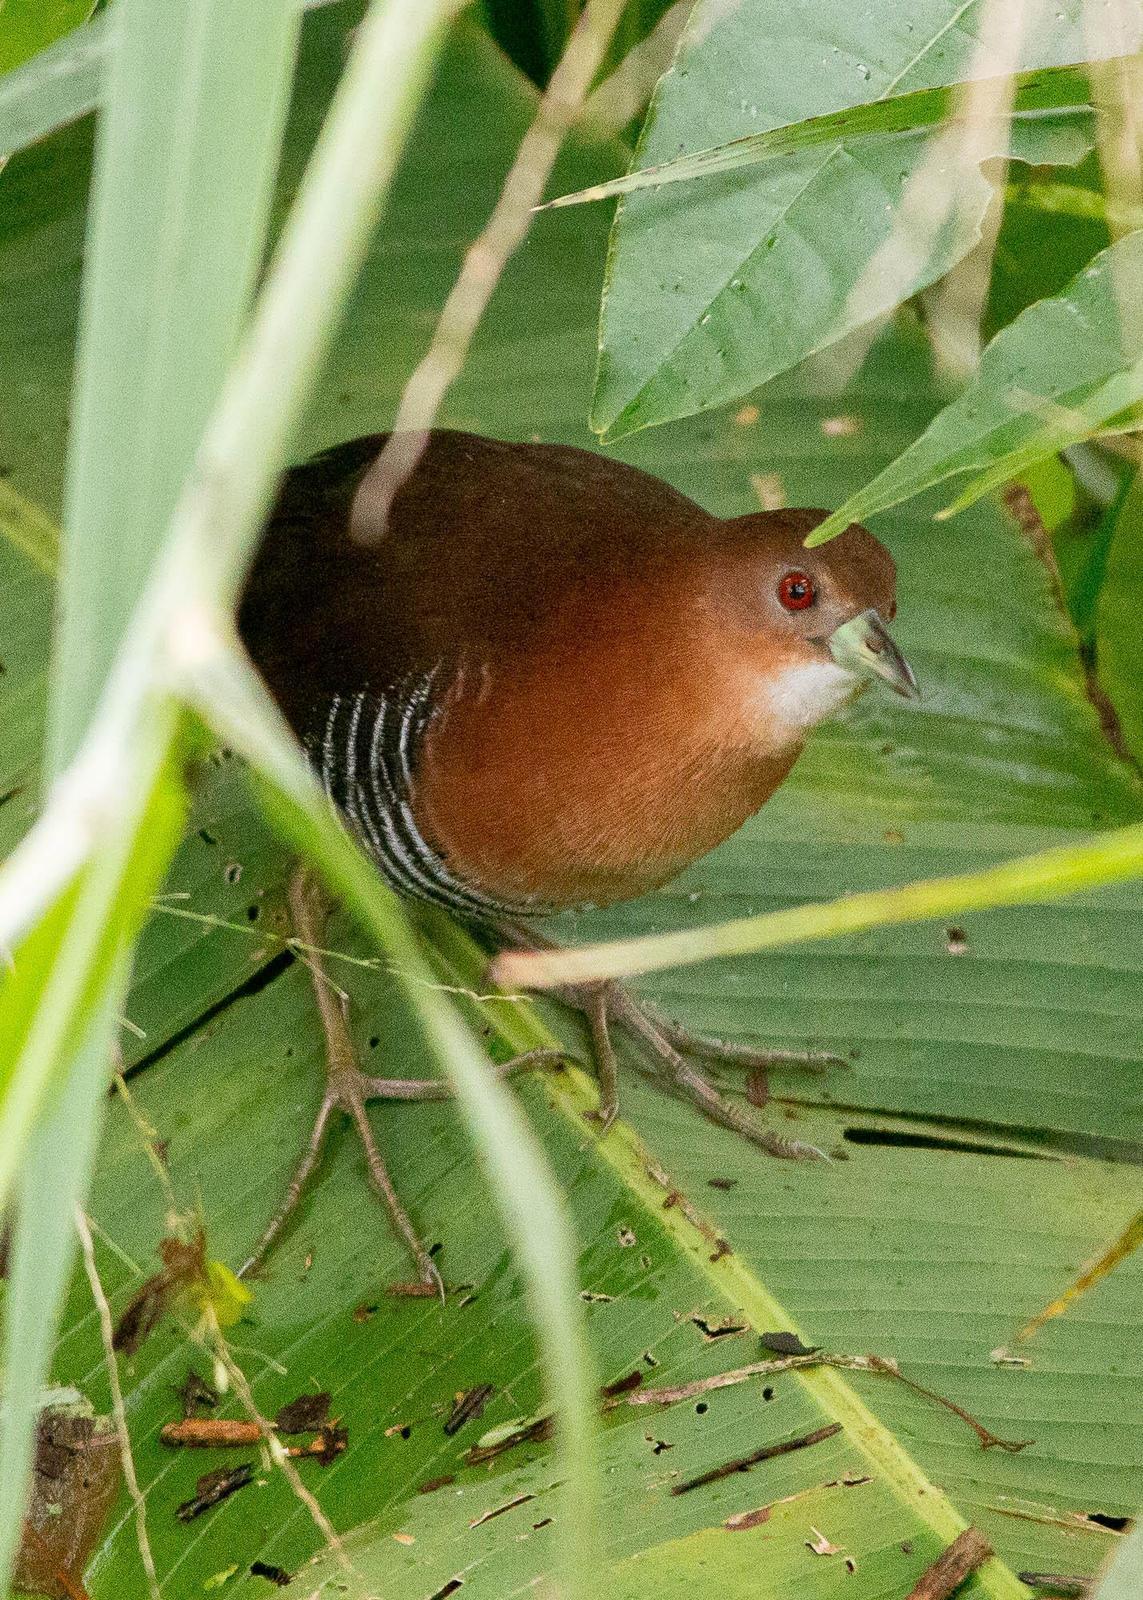 White-throated Crake Photo by Marie-France Rivard